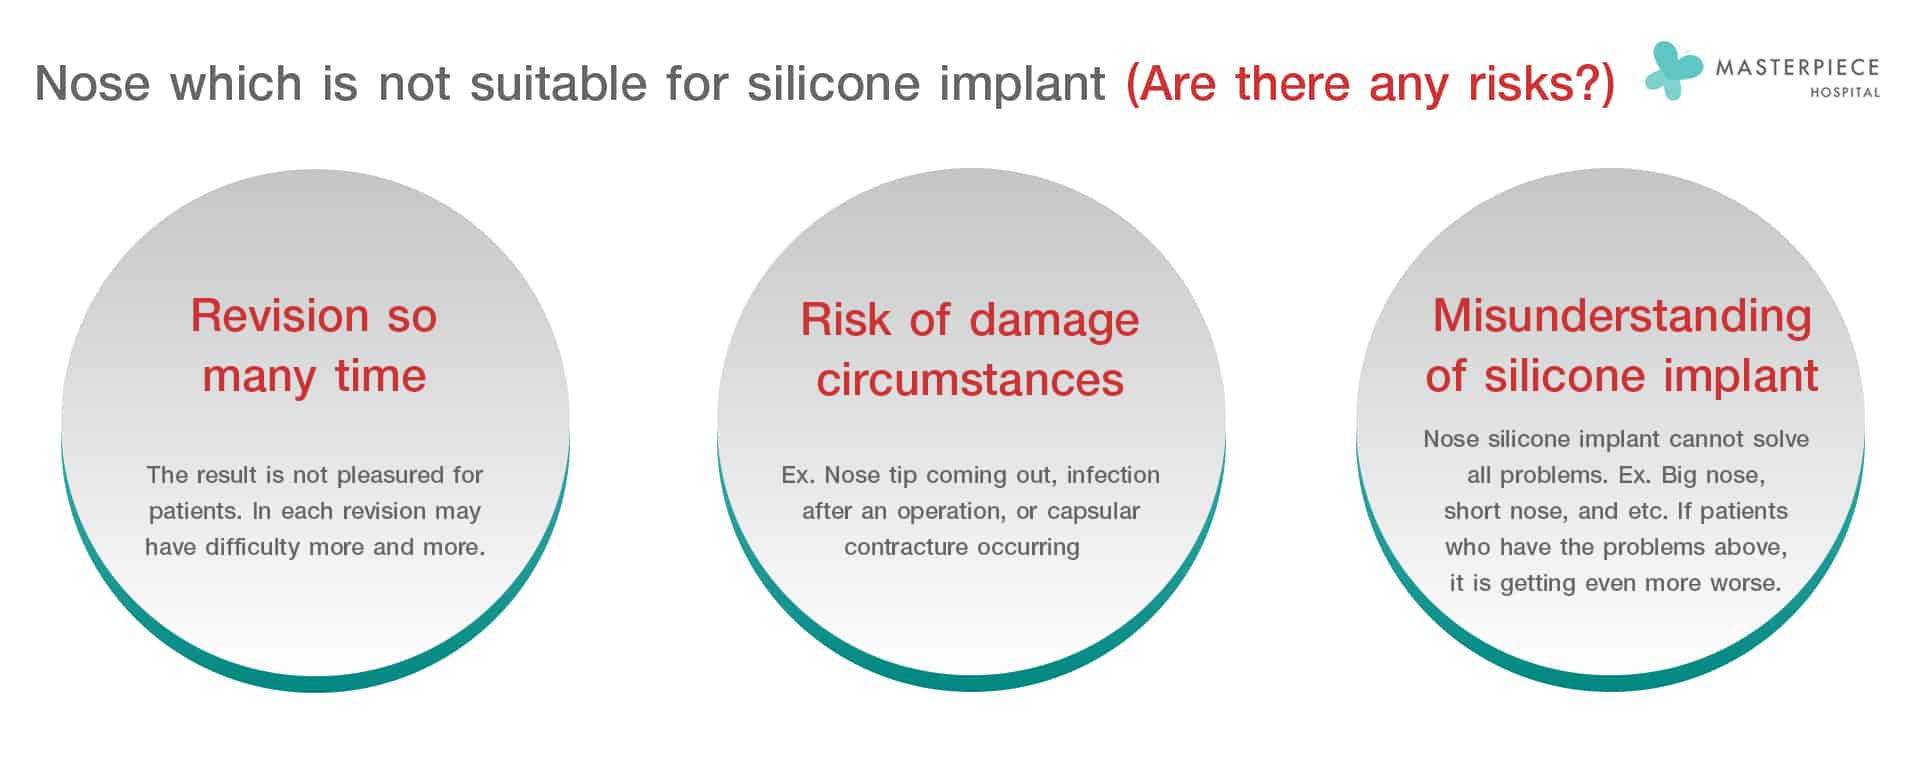 Nose which is not suitable for silicone implant Are there any risks